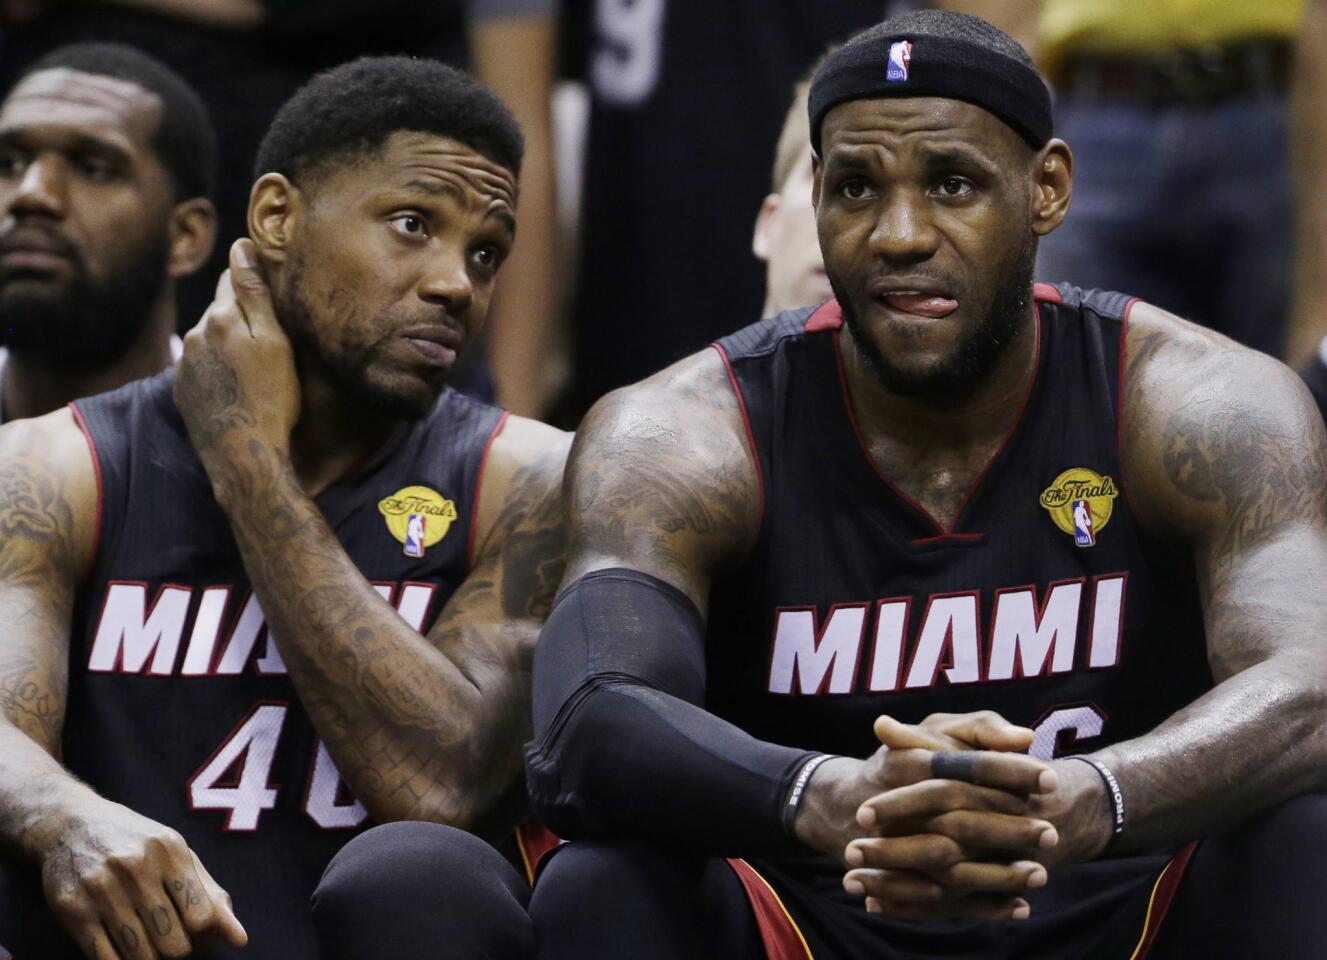 Miami Heat forward Udonis Haslem (40) and LeBron James (6) watch action against the San Antonio Spurs from the bench during the second half in Game 5 of the NBA basketball finals, on Sunday, June 15, 2014, in San Antonio. The Spurs won the NBA championship 104-87. (David J. Phillip)